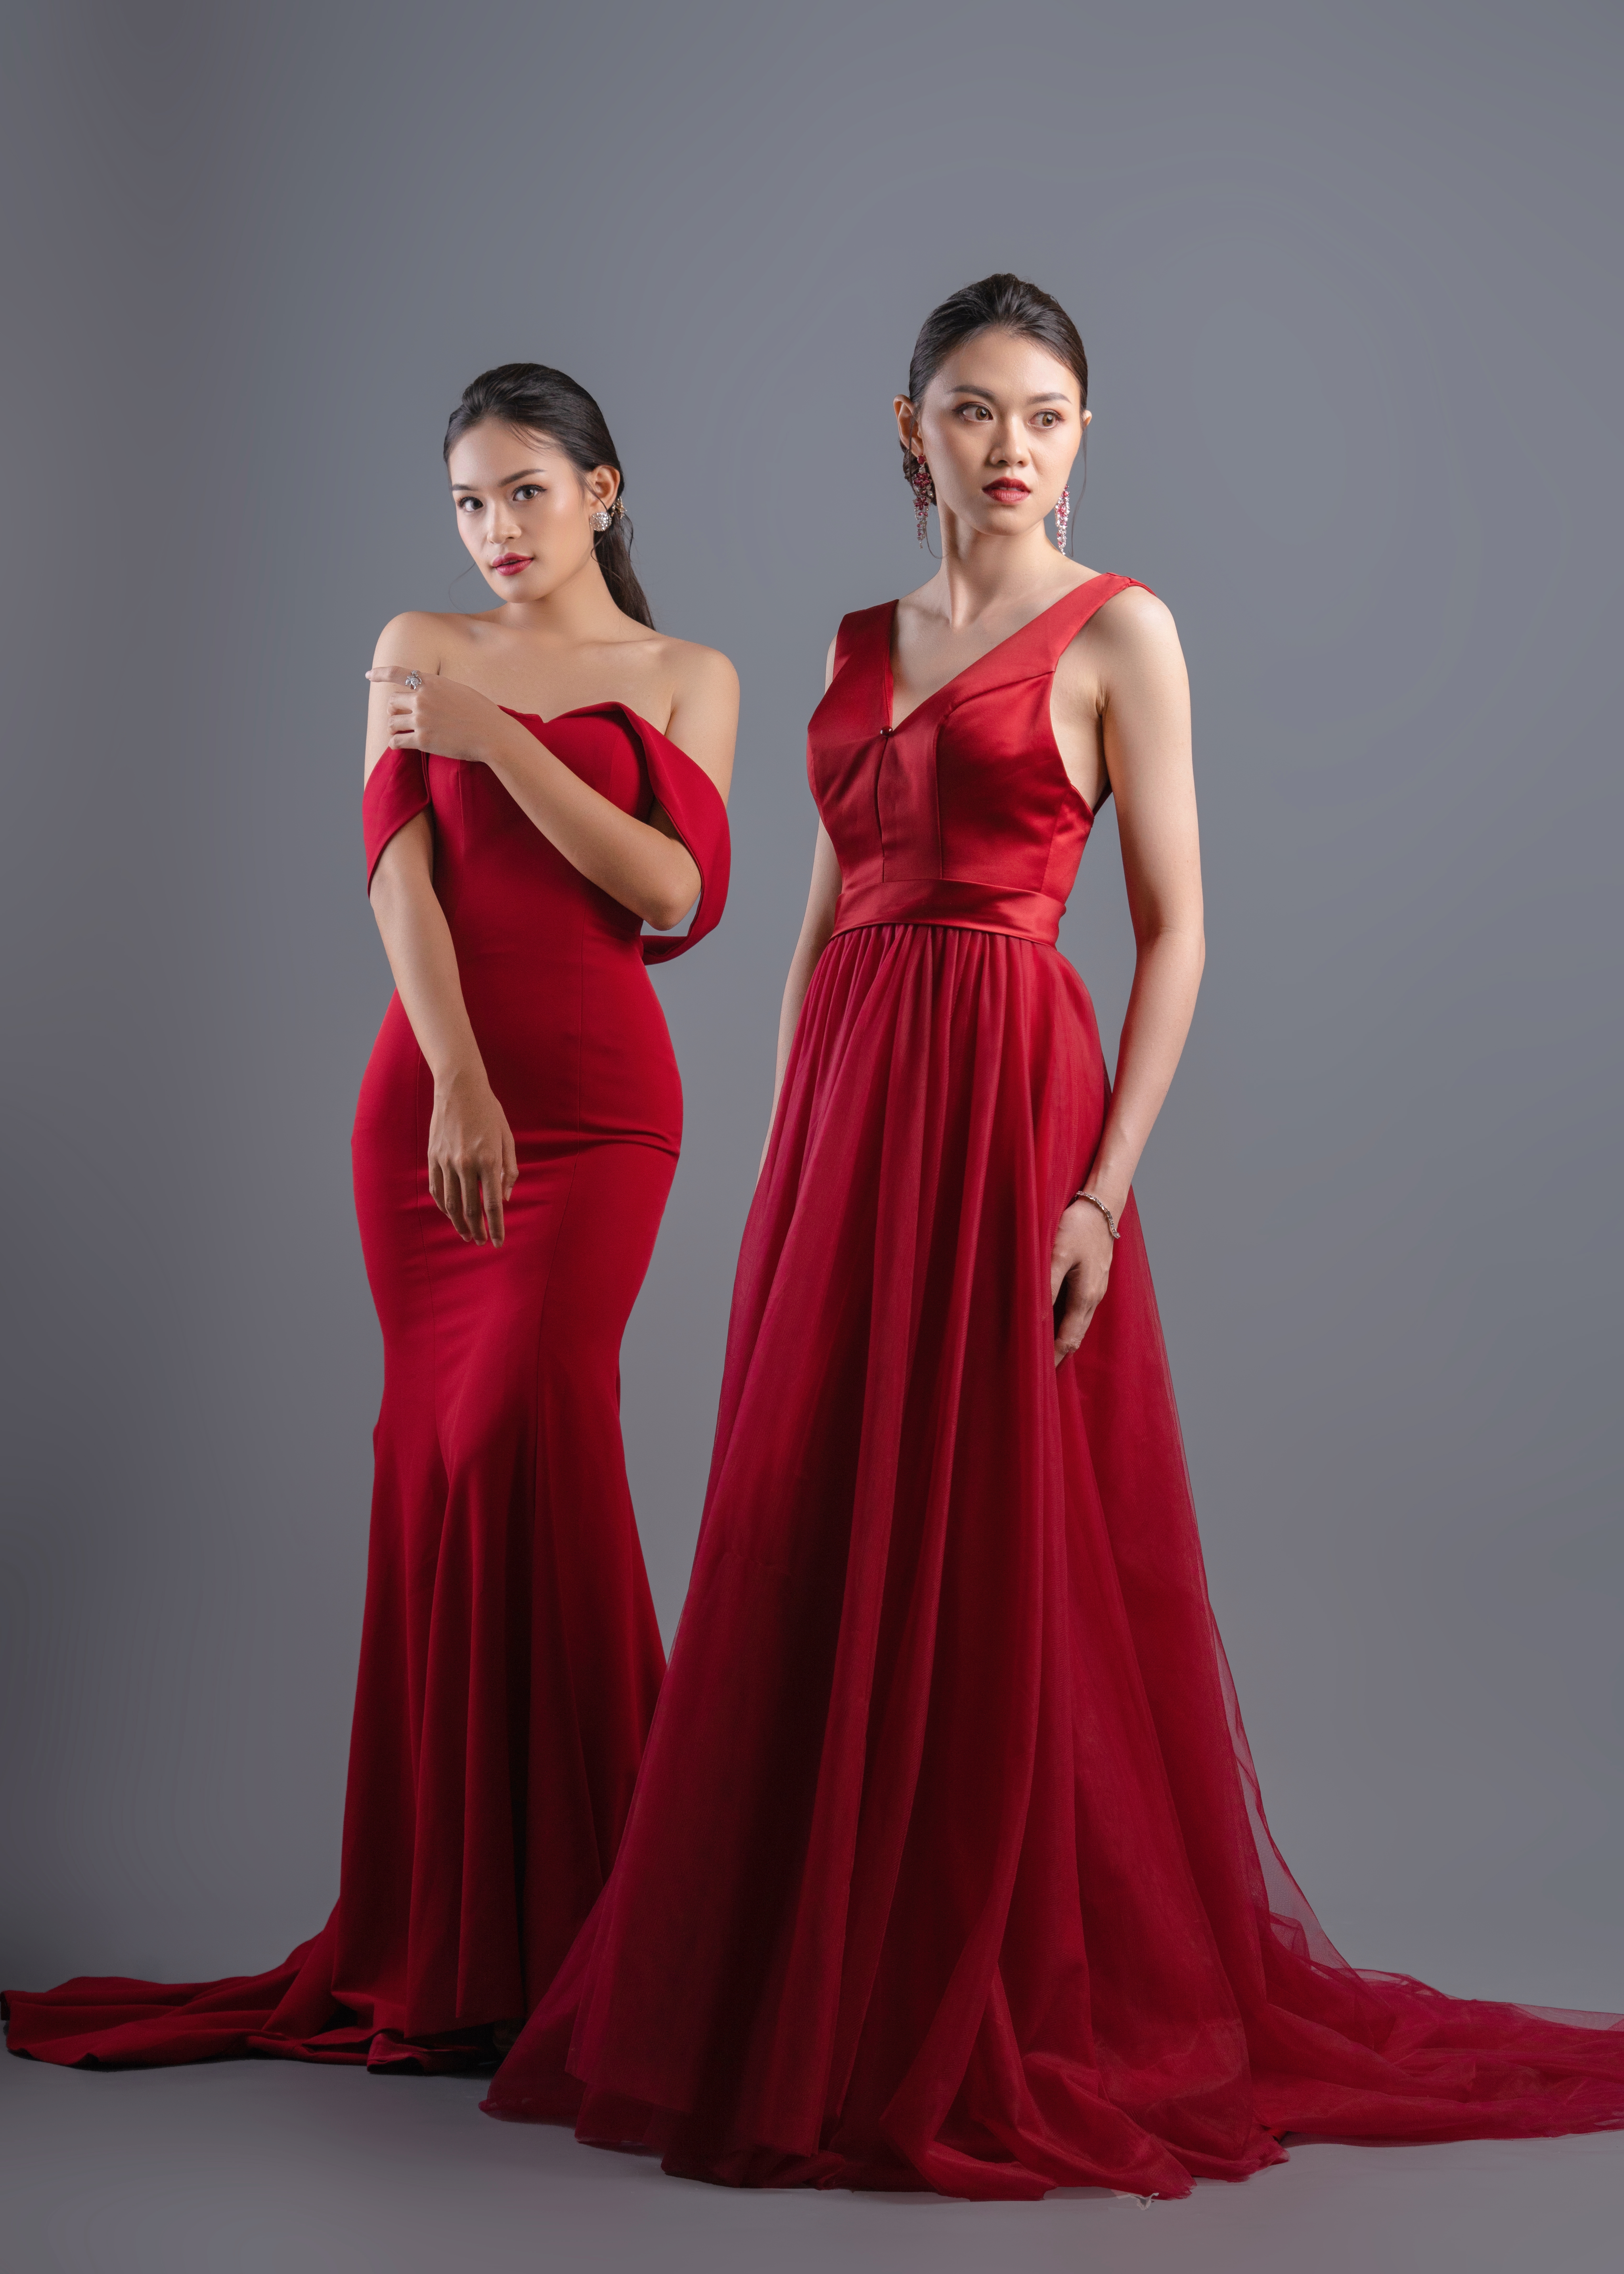 gown27-Resize